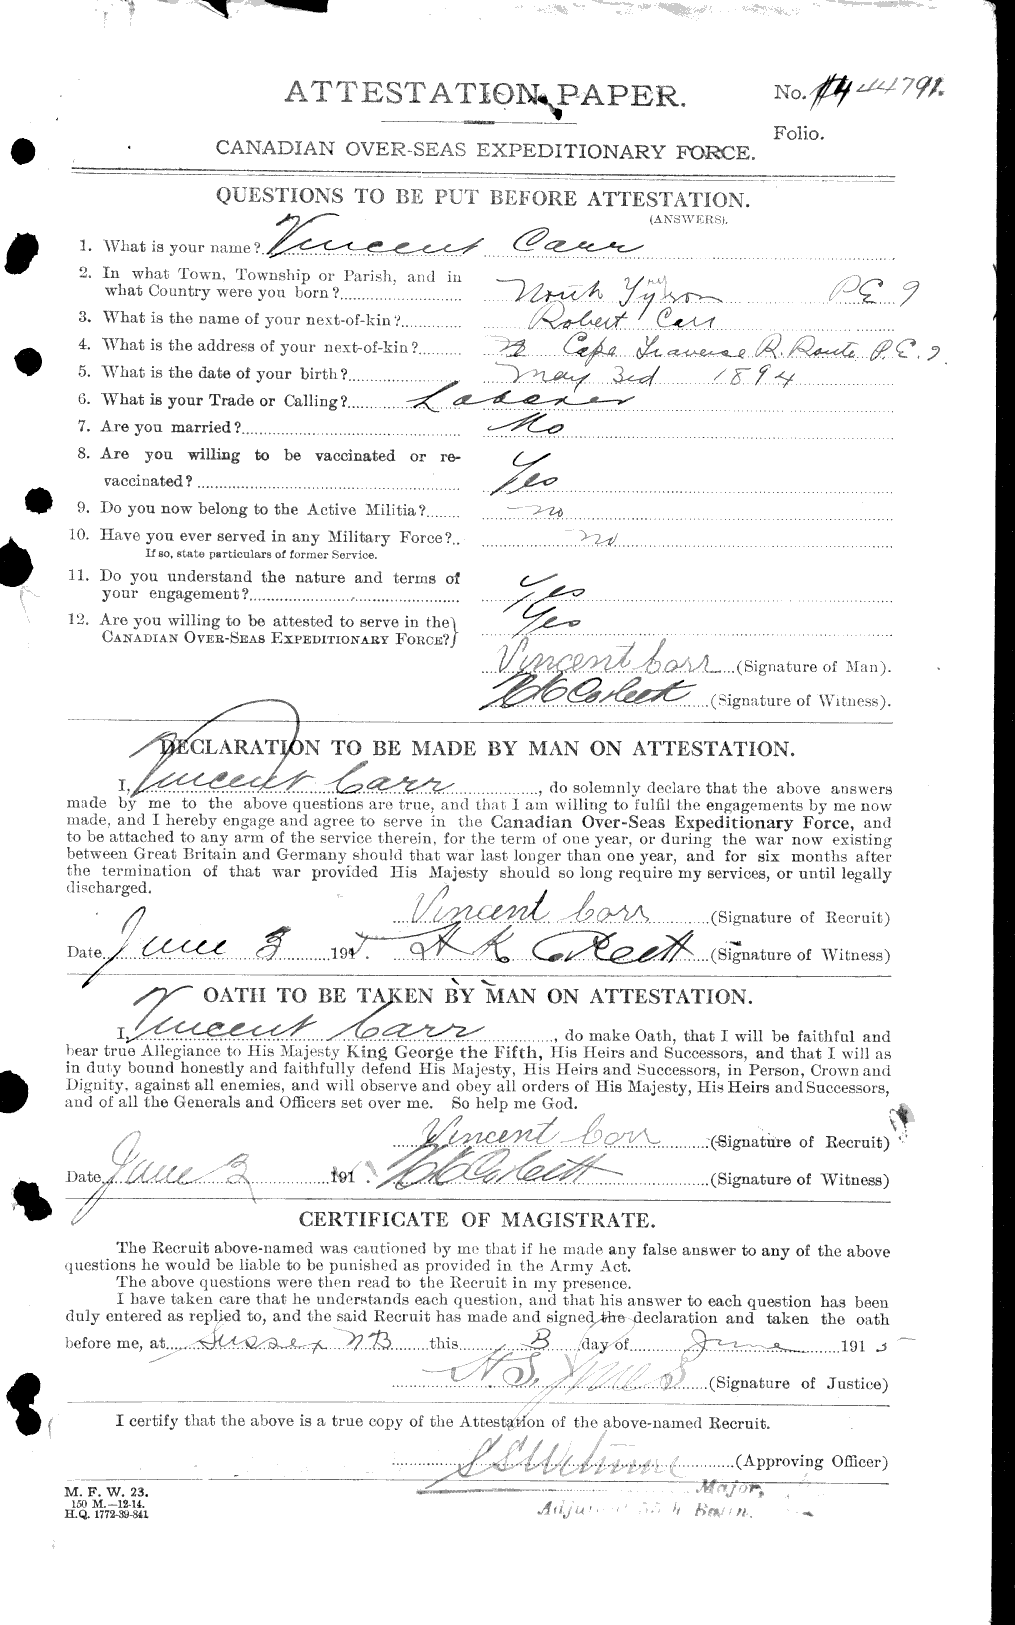 Personnel Records of the First World War - CEF 011247a